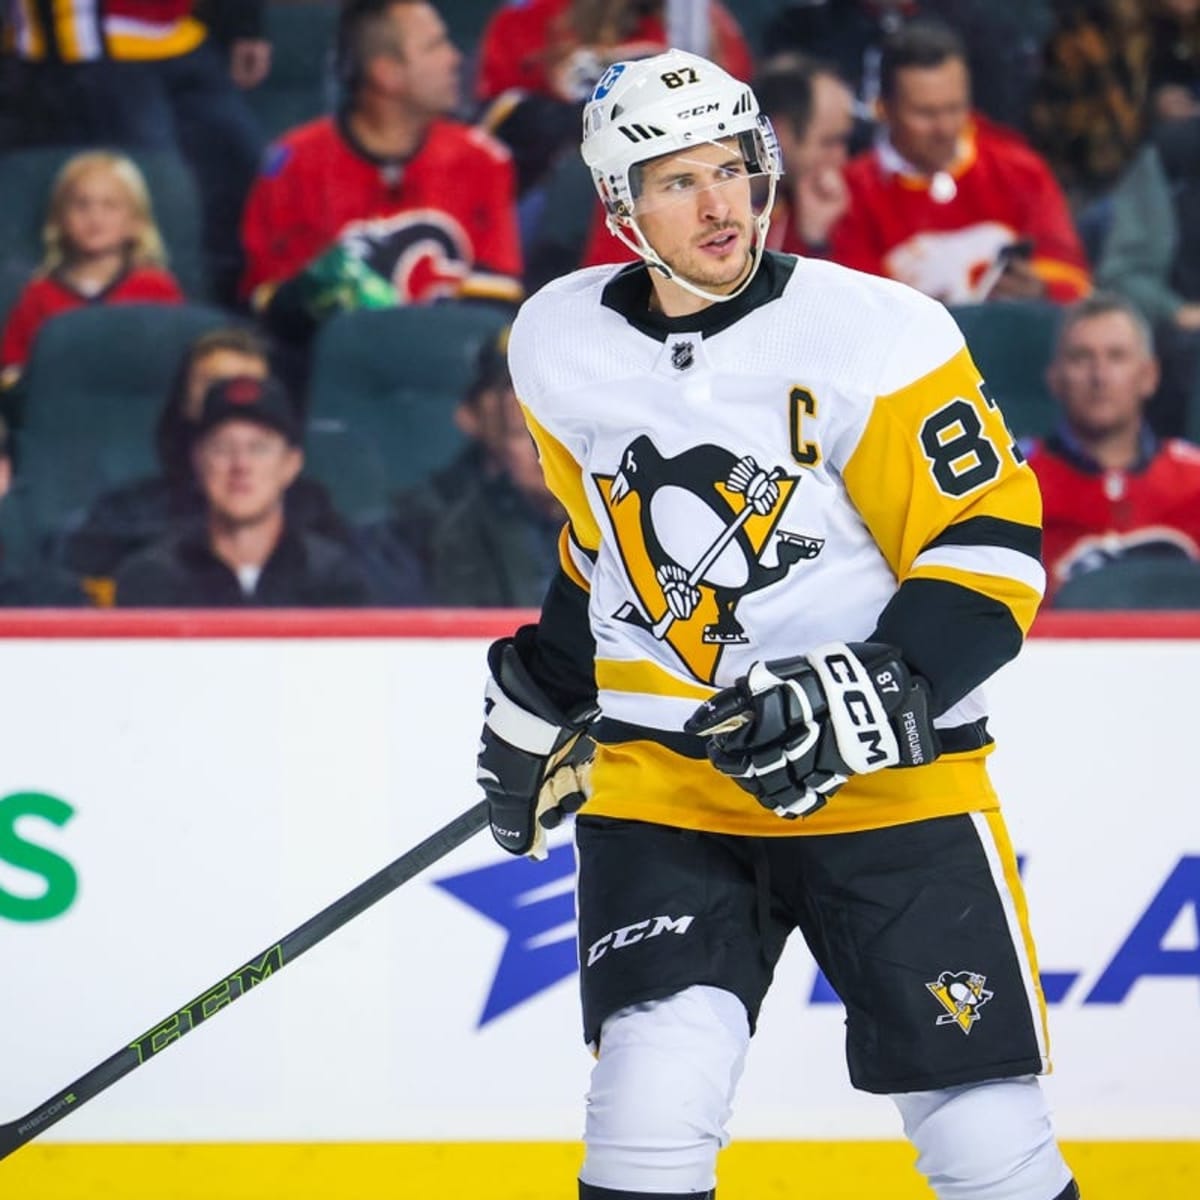 Watch Detroit Red Wings at Pittsburgh Penguins Stream NHL online - How to Watch and Stream Major League and College Sports